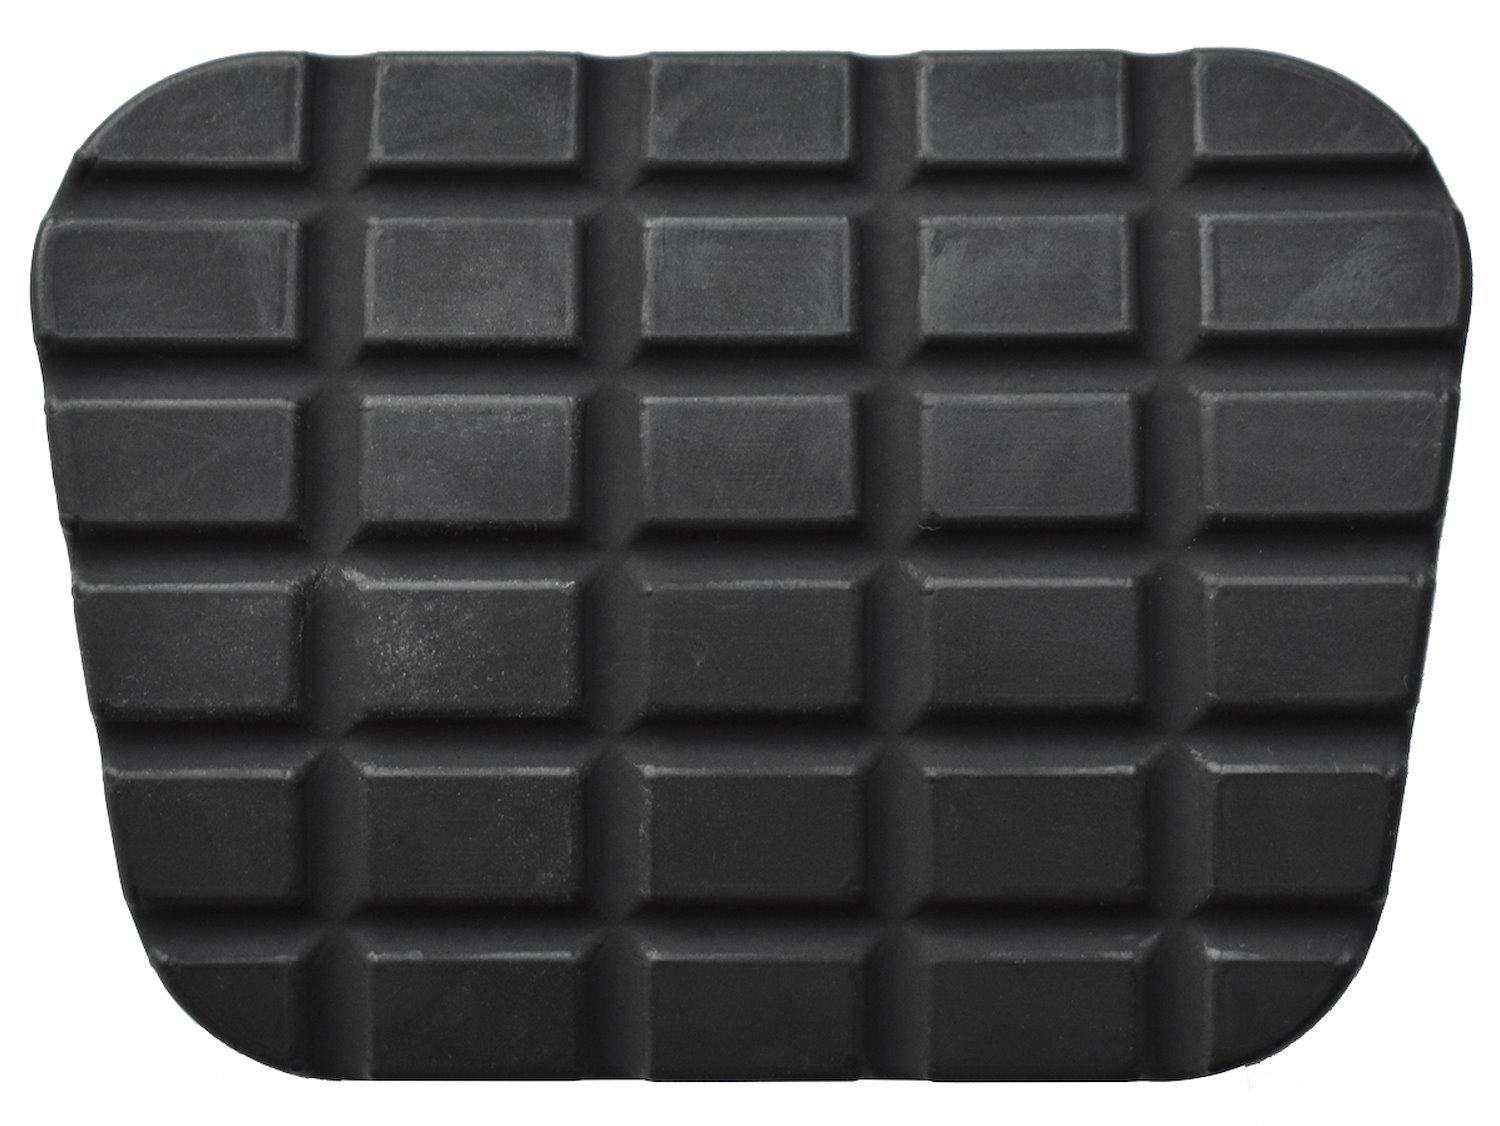 Clutch or Brake Pedal Pad for 1960-1972 GM